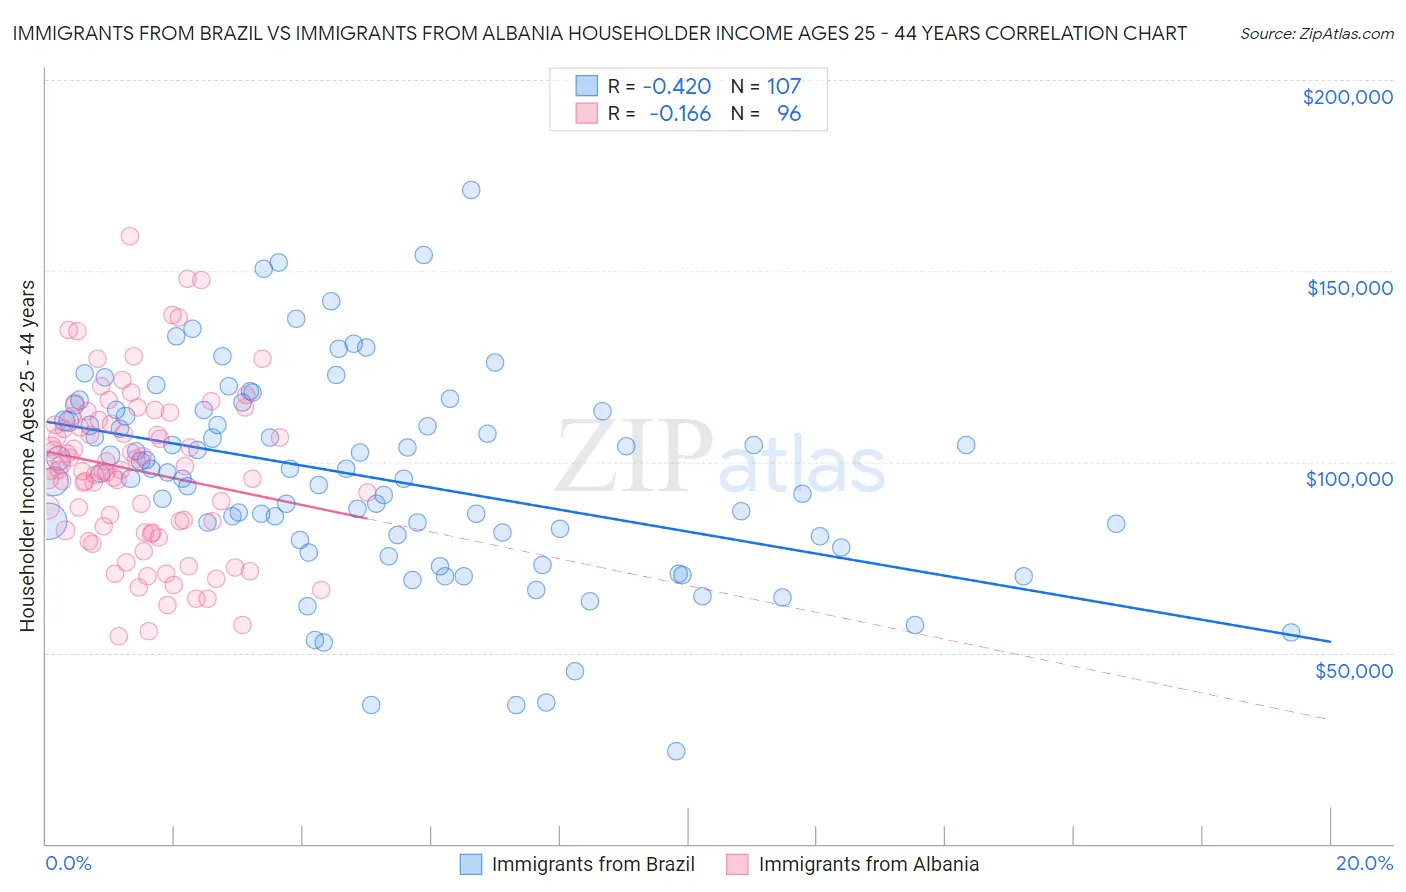 Immigrants from Brazil vs Immigrants from Albania Householder Income Ages 25 - 44 years